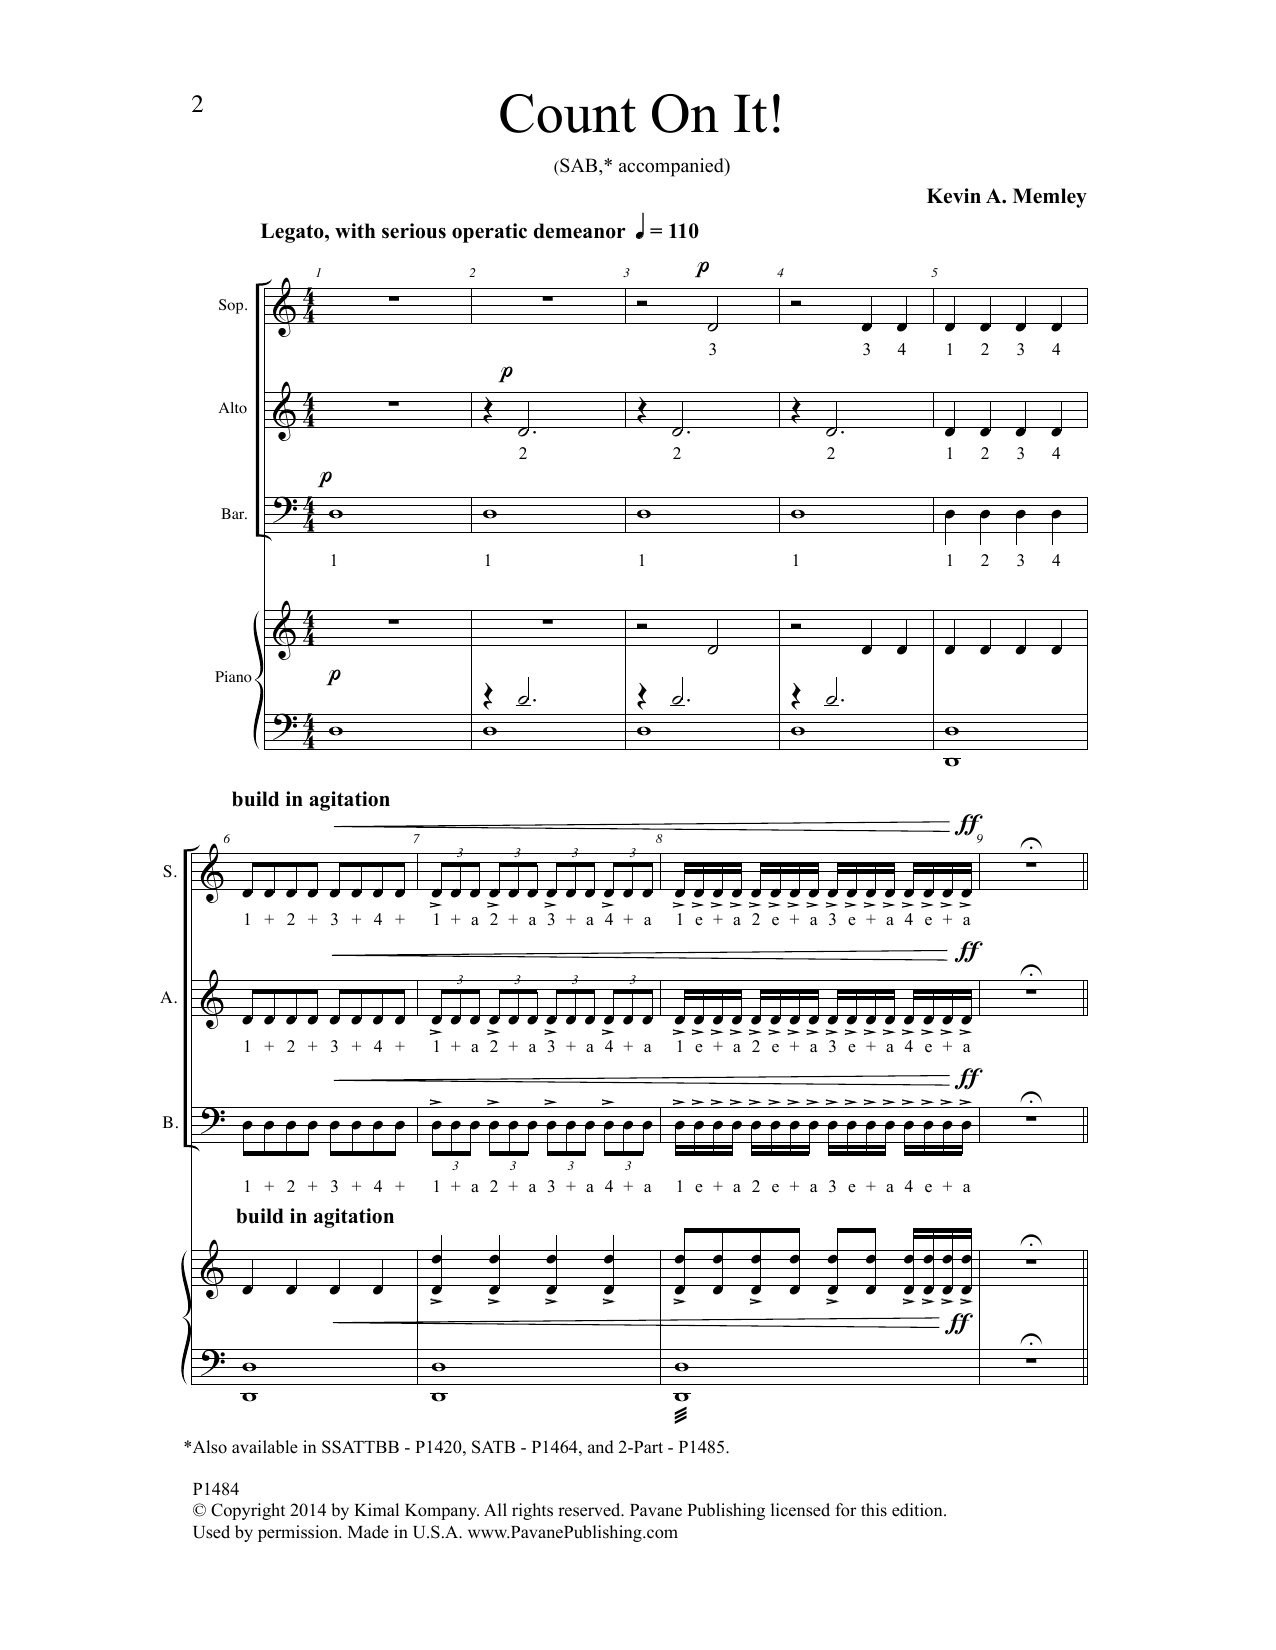 Download Kevin A. Memley Count On It Sheet Music